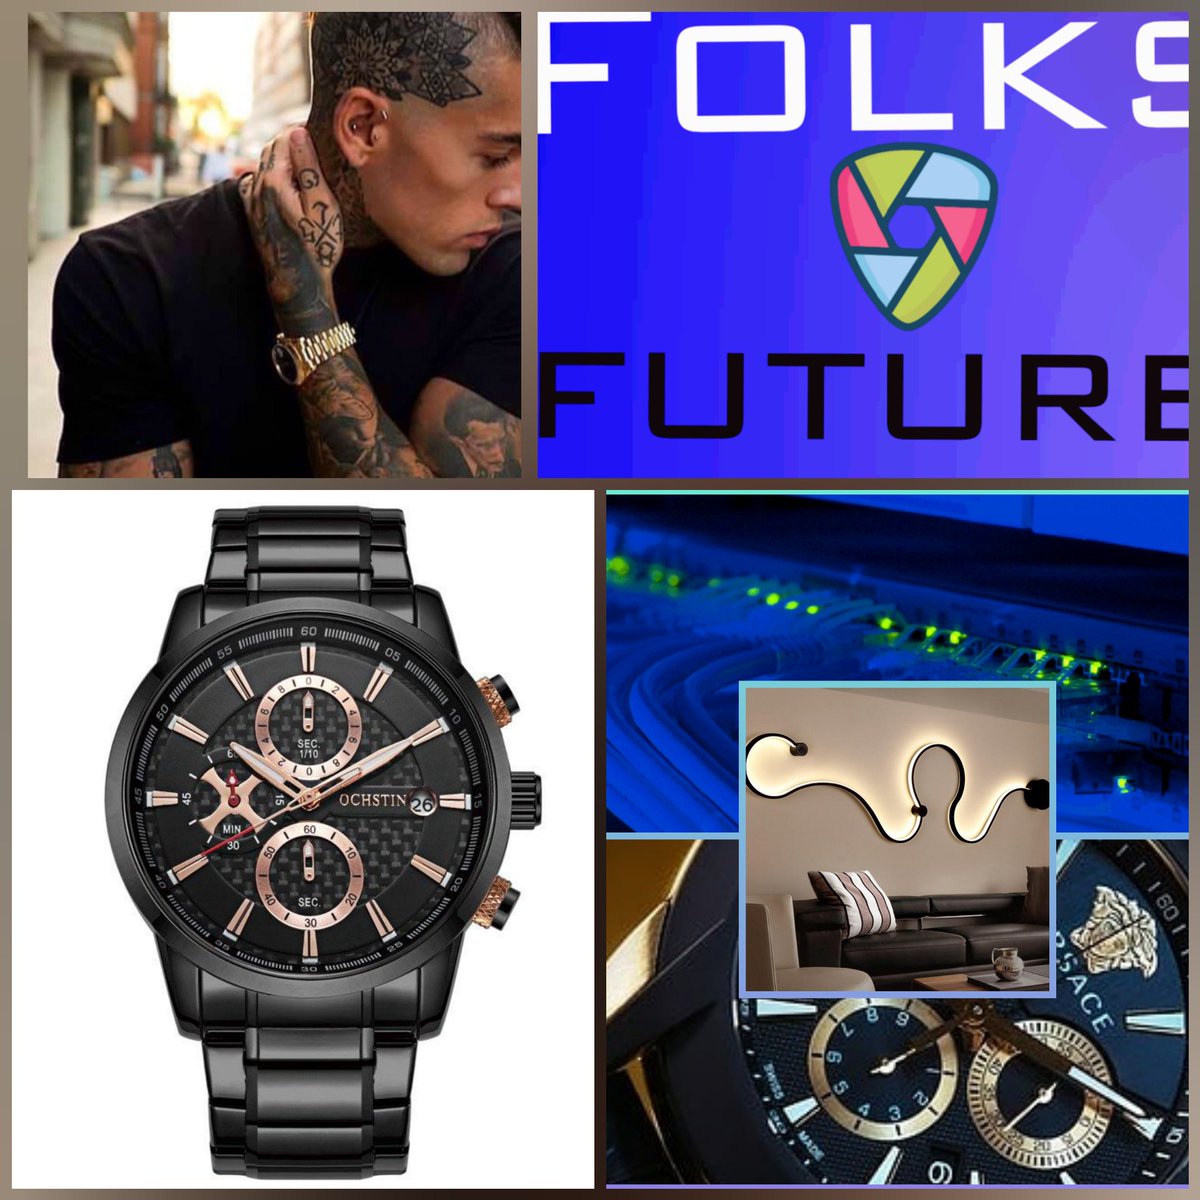 Get your High Profile Style Game On. We got the goods. Lets play and get Cray.. ◇FolksandFuture.com ComingProducts.com #Folks_Future #Mensfashiontrends #LifestyleProducts